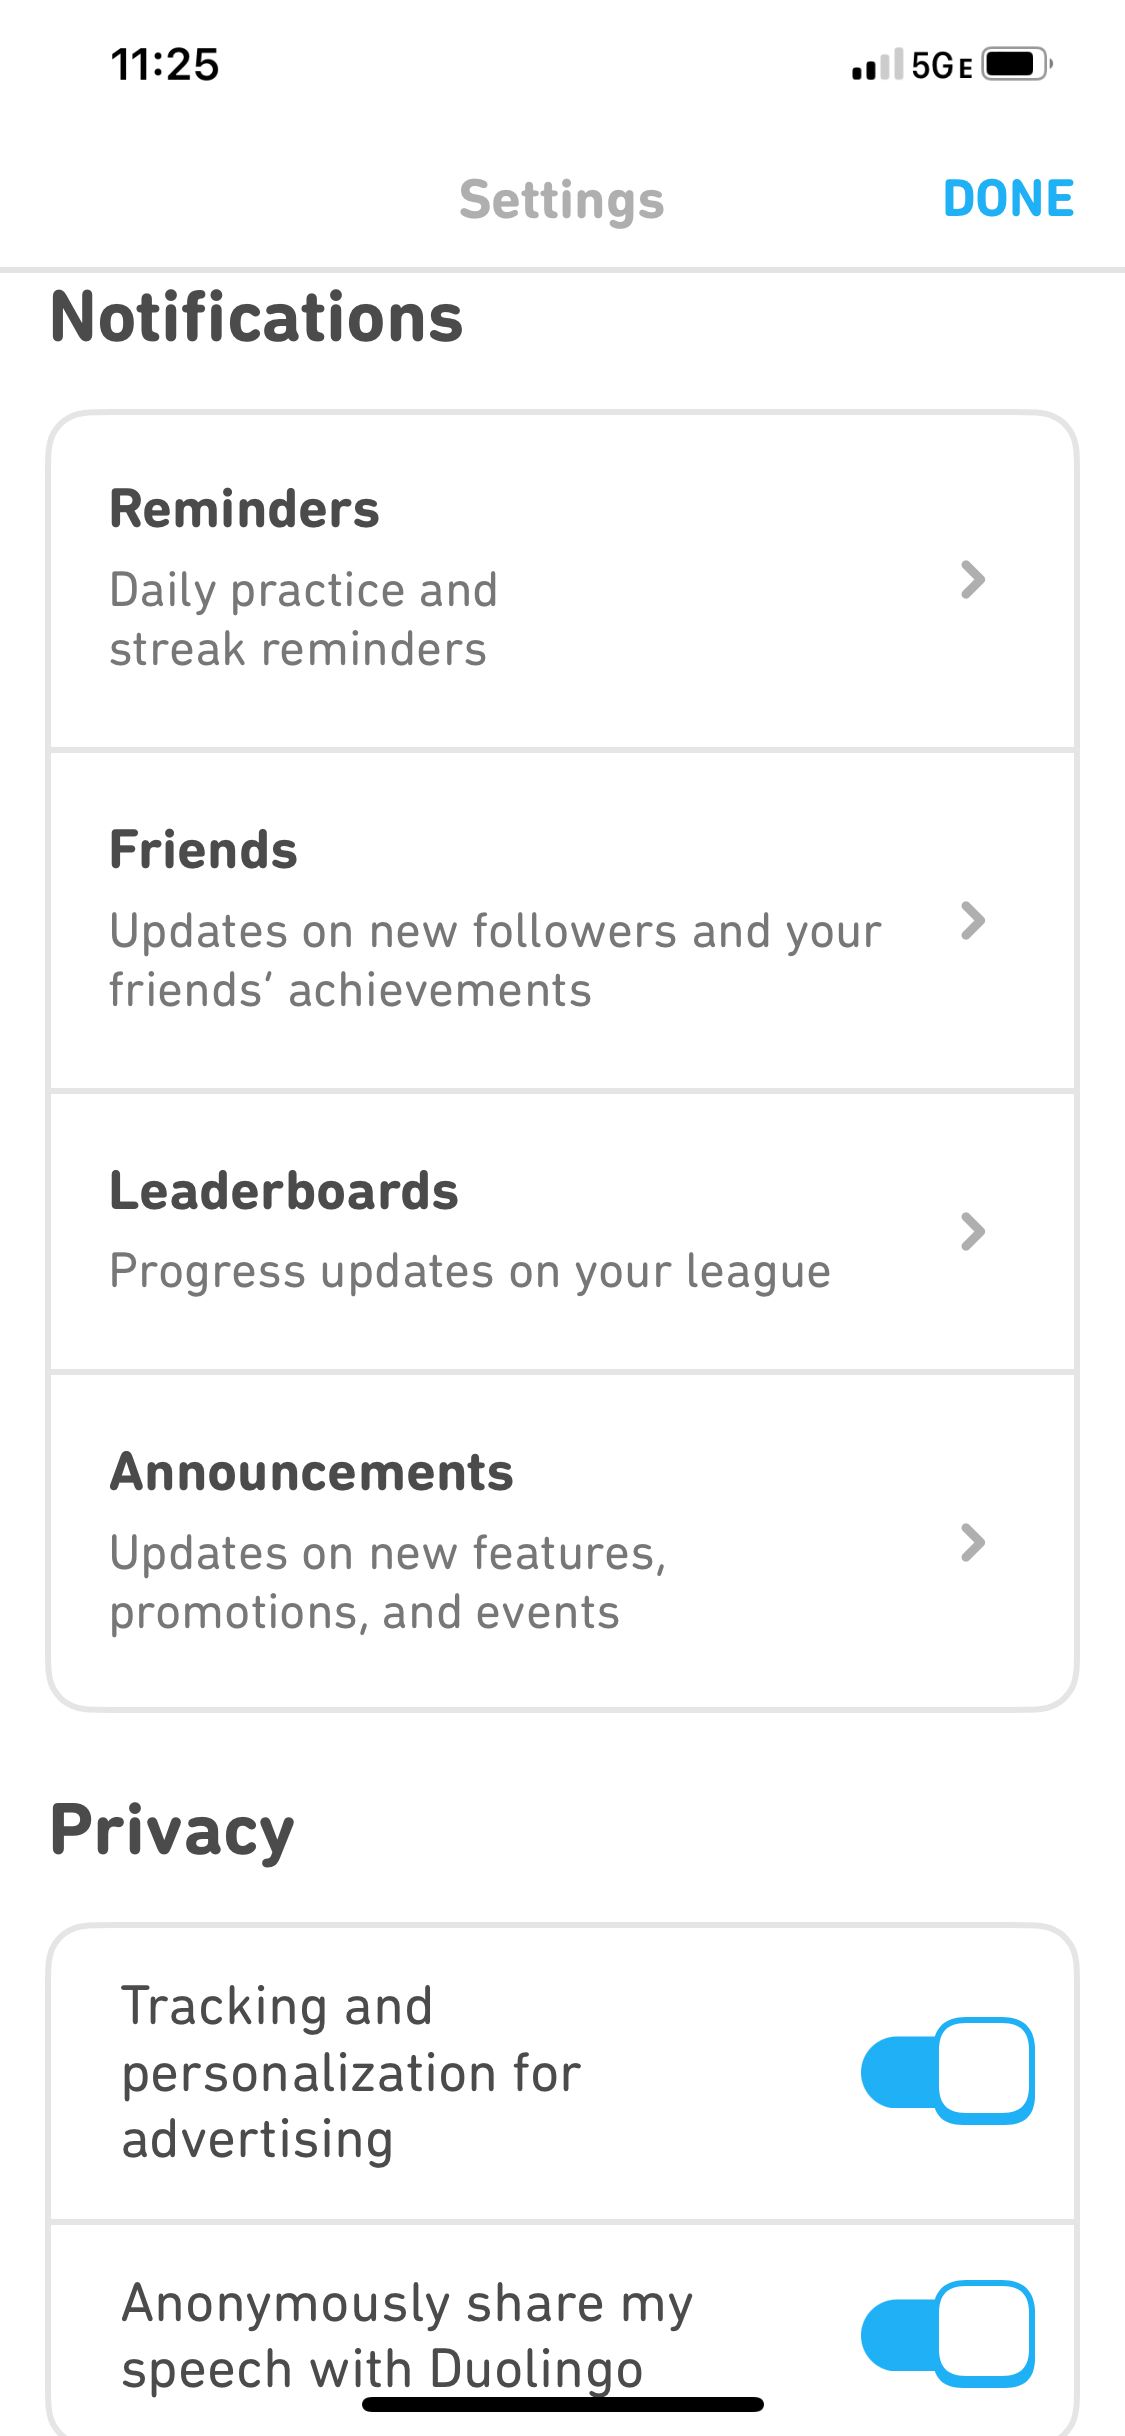 Screenshot of the Duolingo settings page with options to change settings for Reminders, Friends, Leaderboard, and Announcements.